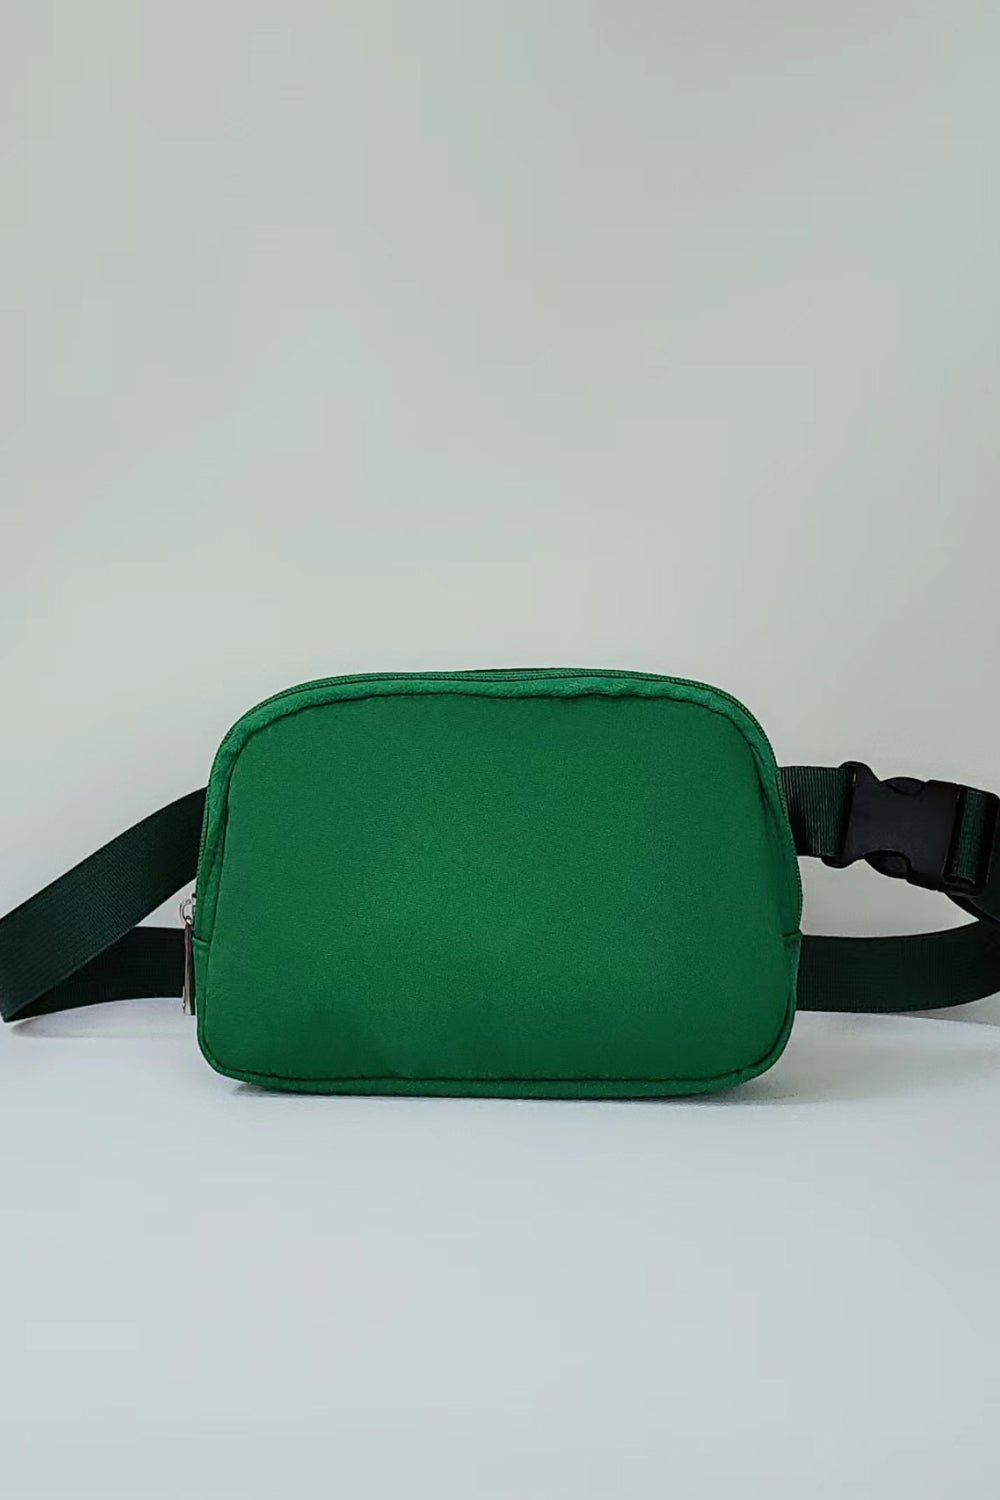 Buckle Zip Closure Fanny Pack - Fashion Girl Online Store